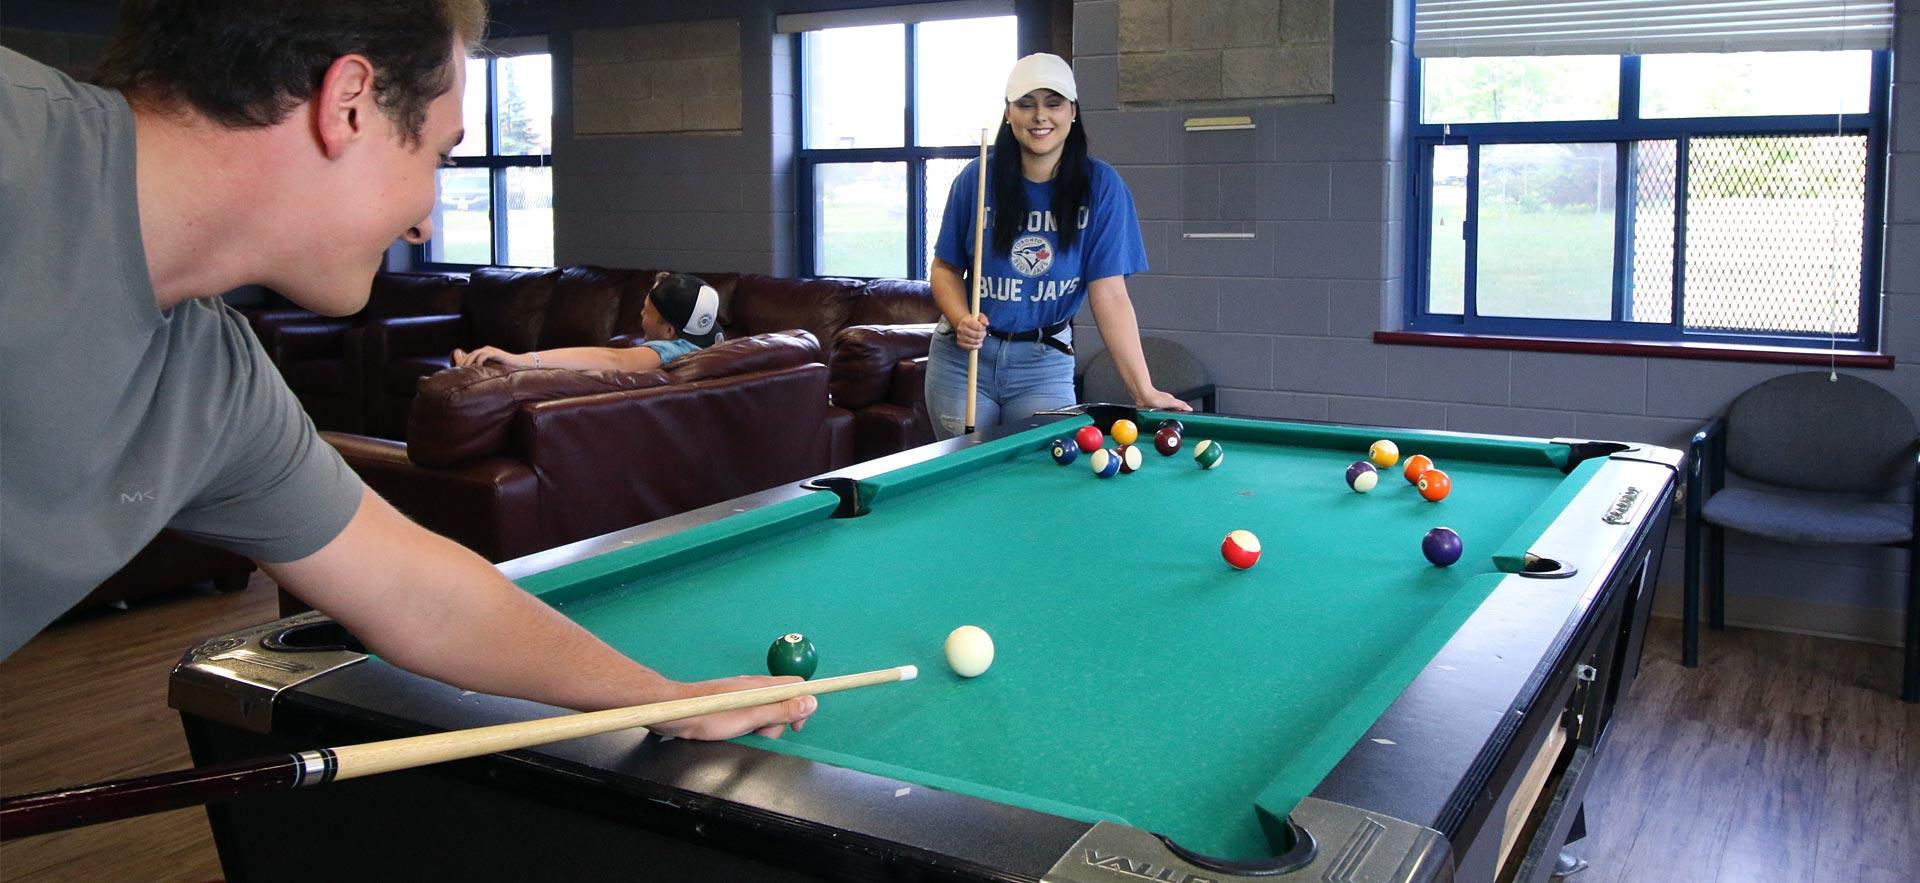 Two students playing pool on campus.